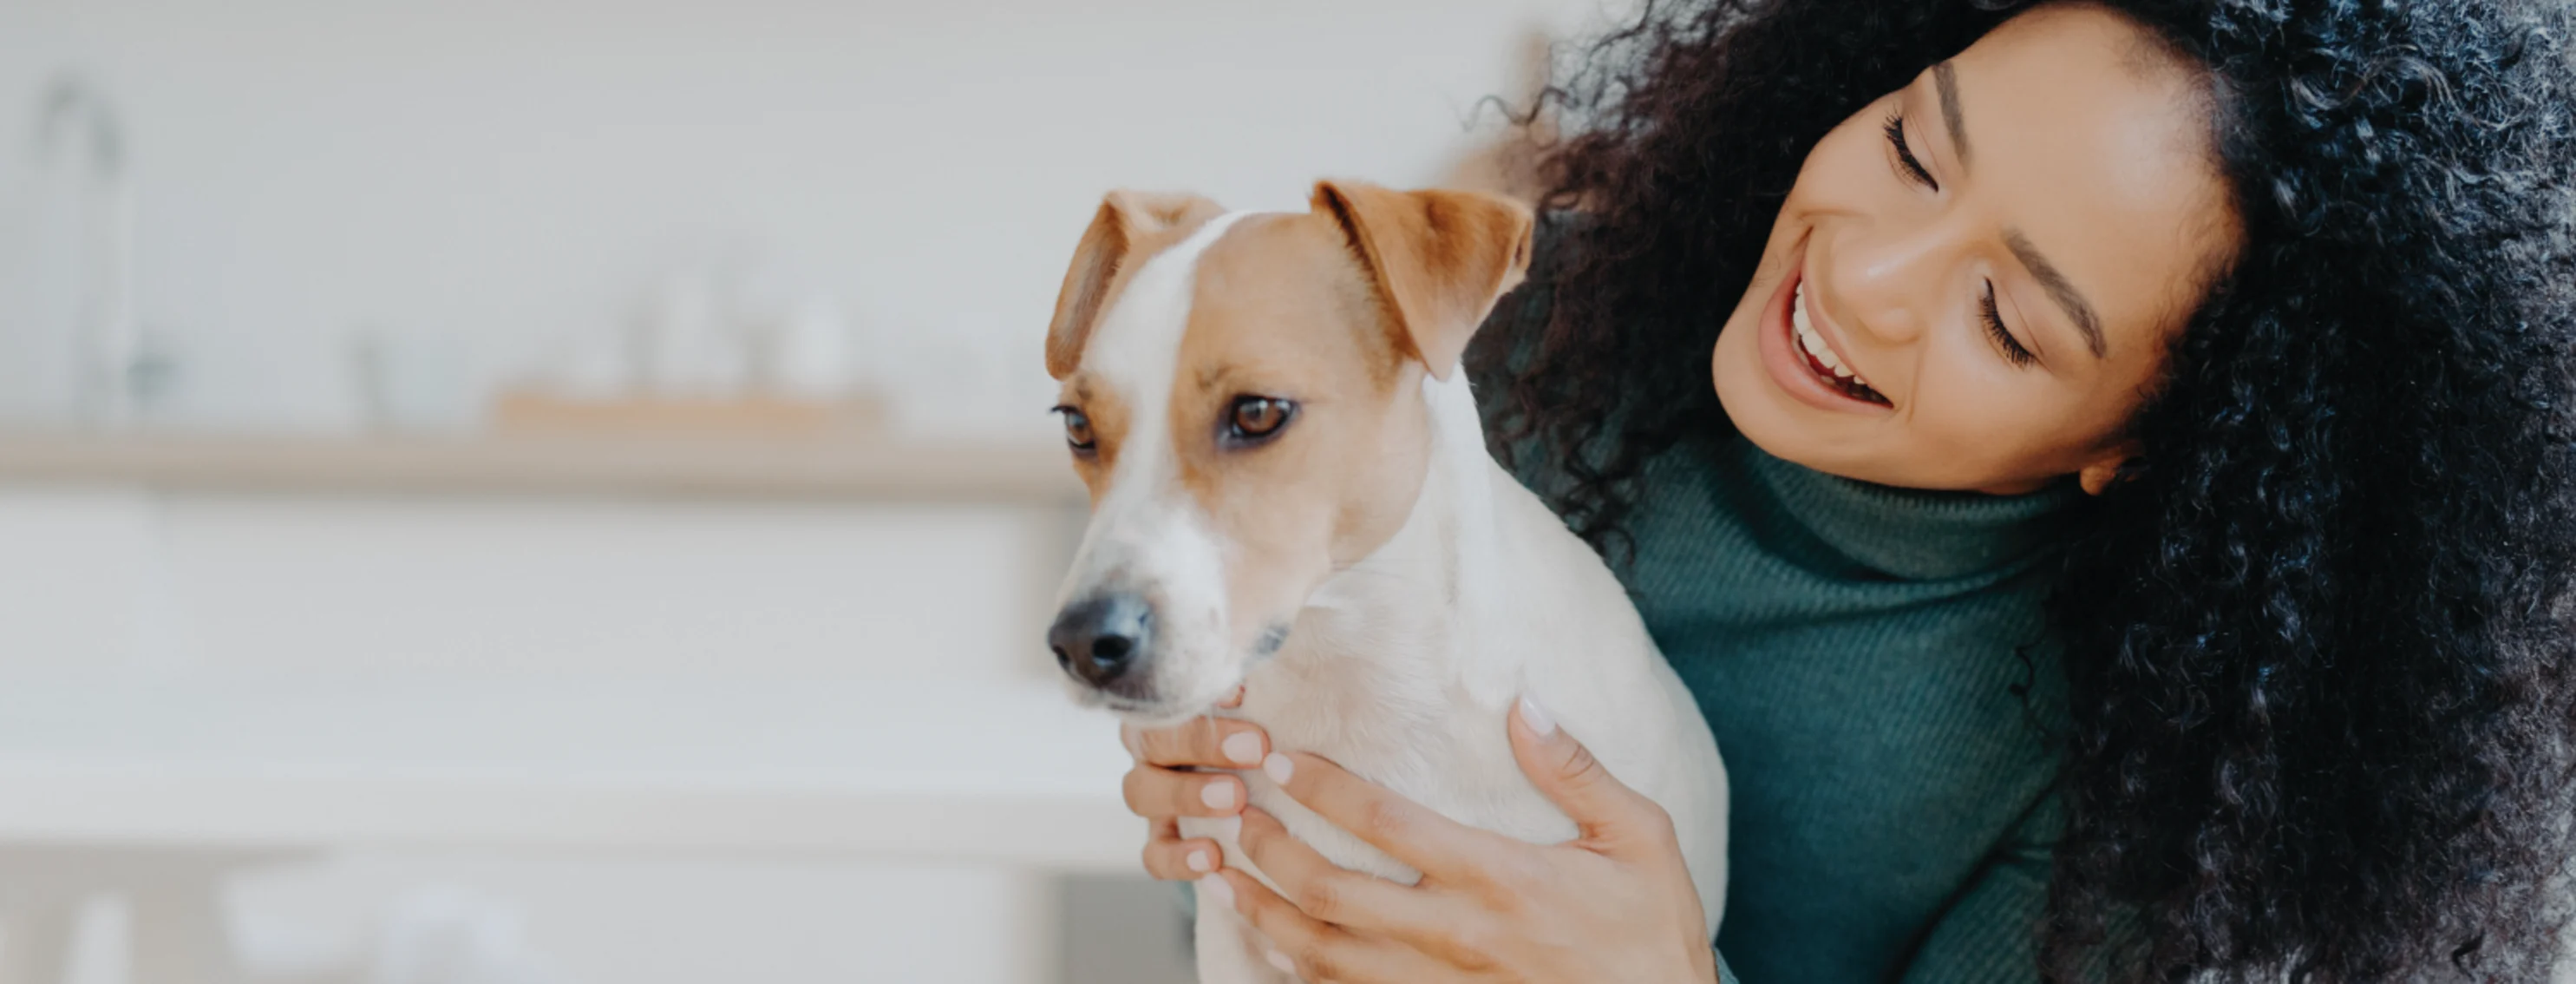 Woman looking at dog holding up